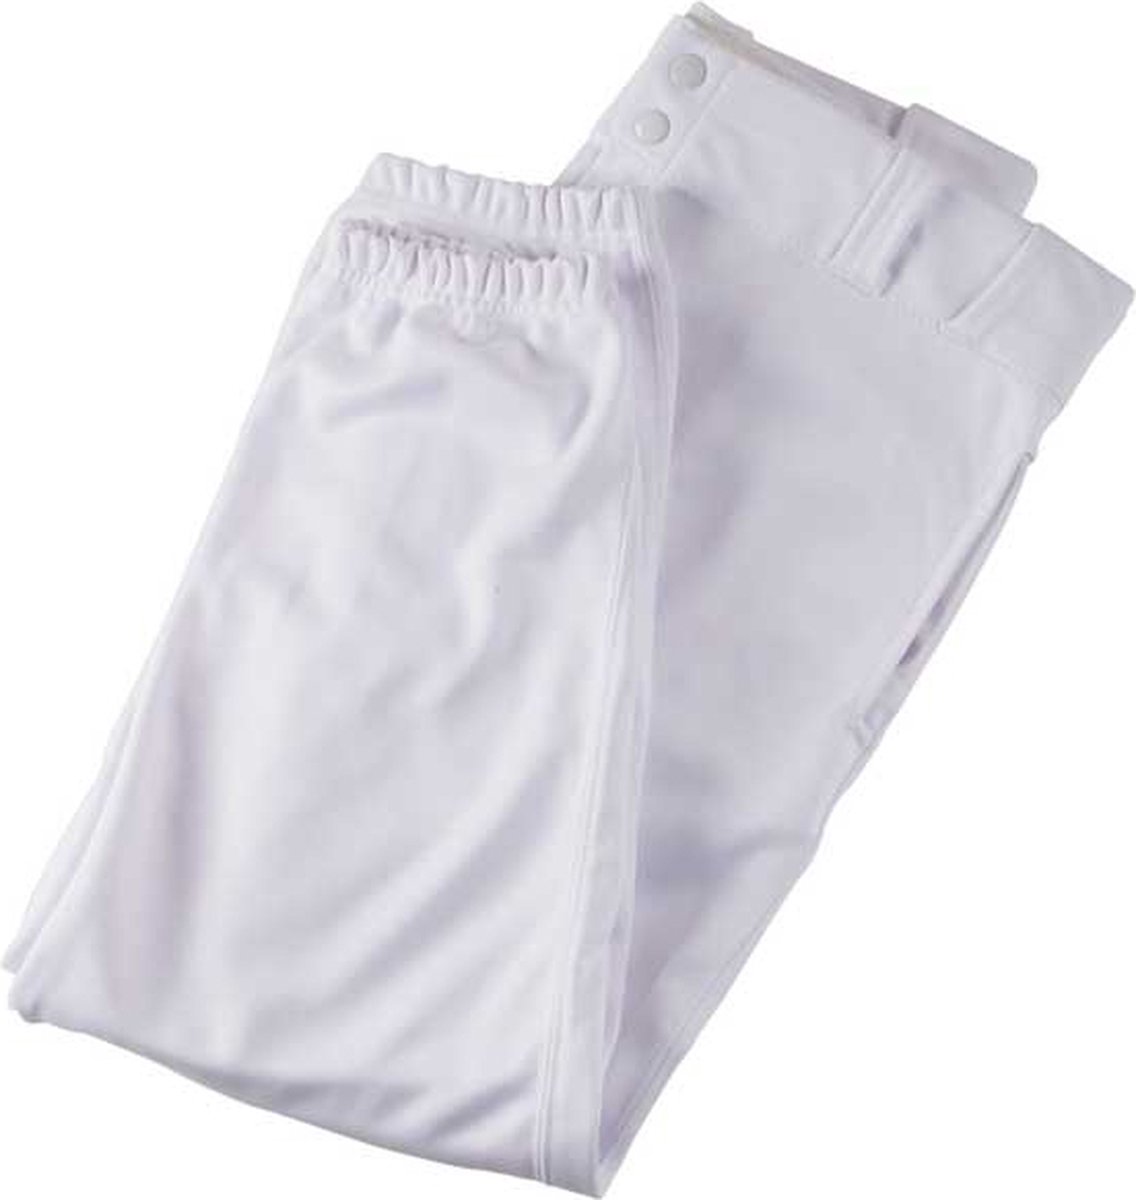 Smitty Official's Knickers 38 White